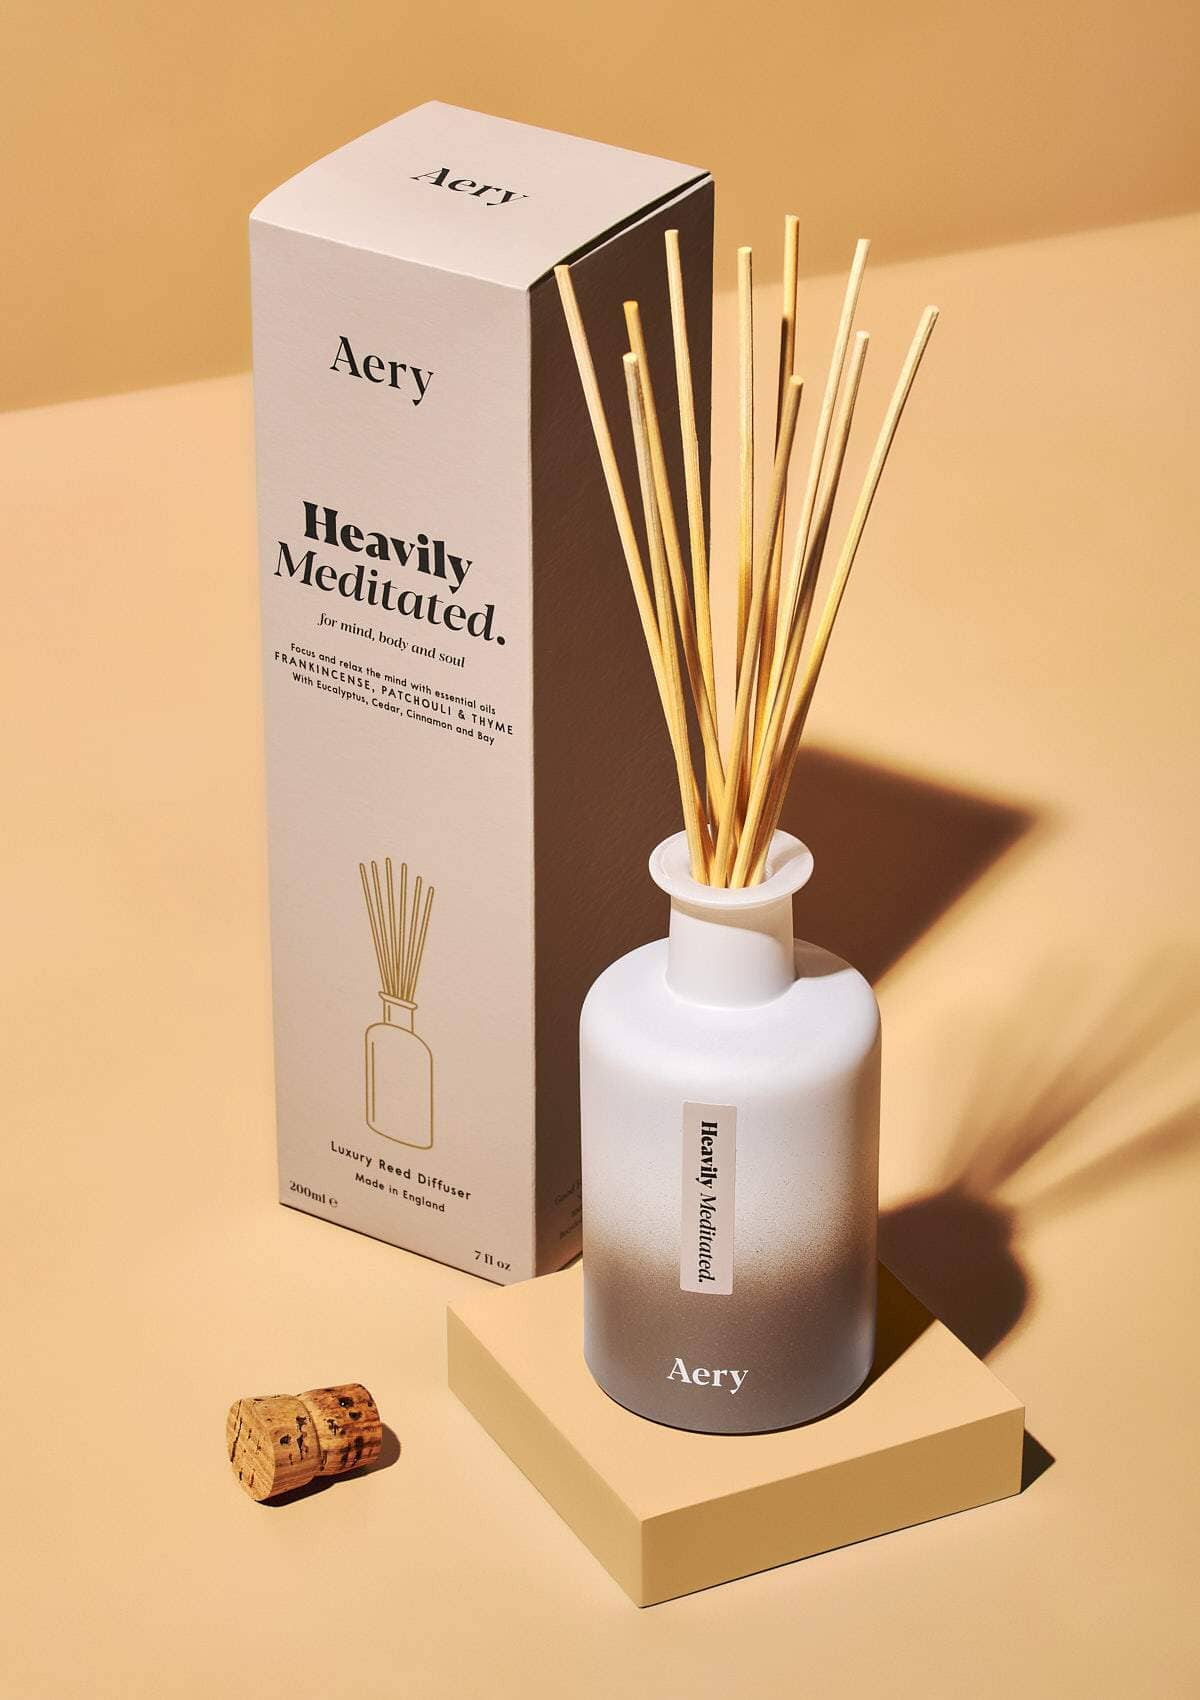 Heavily Meditated Reed Diffuser - Frankincense Patchouli and Thyme